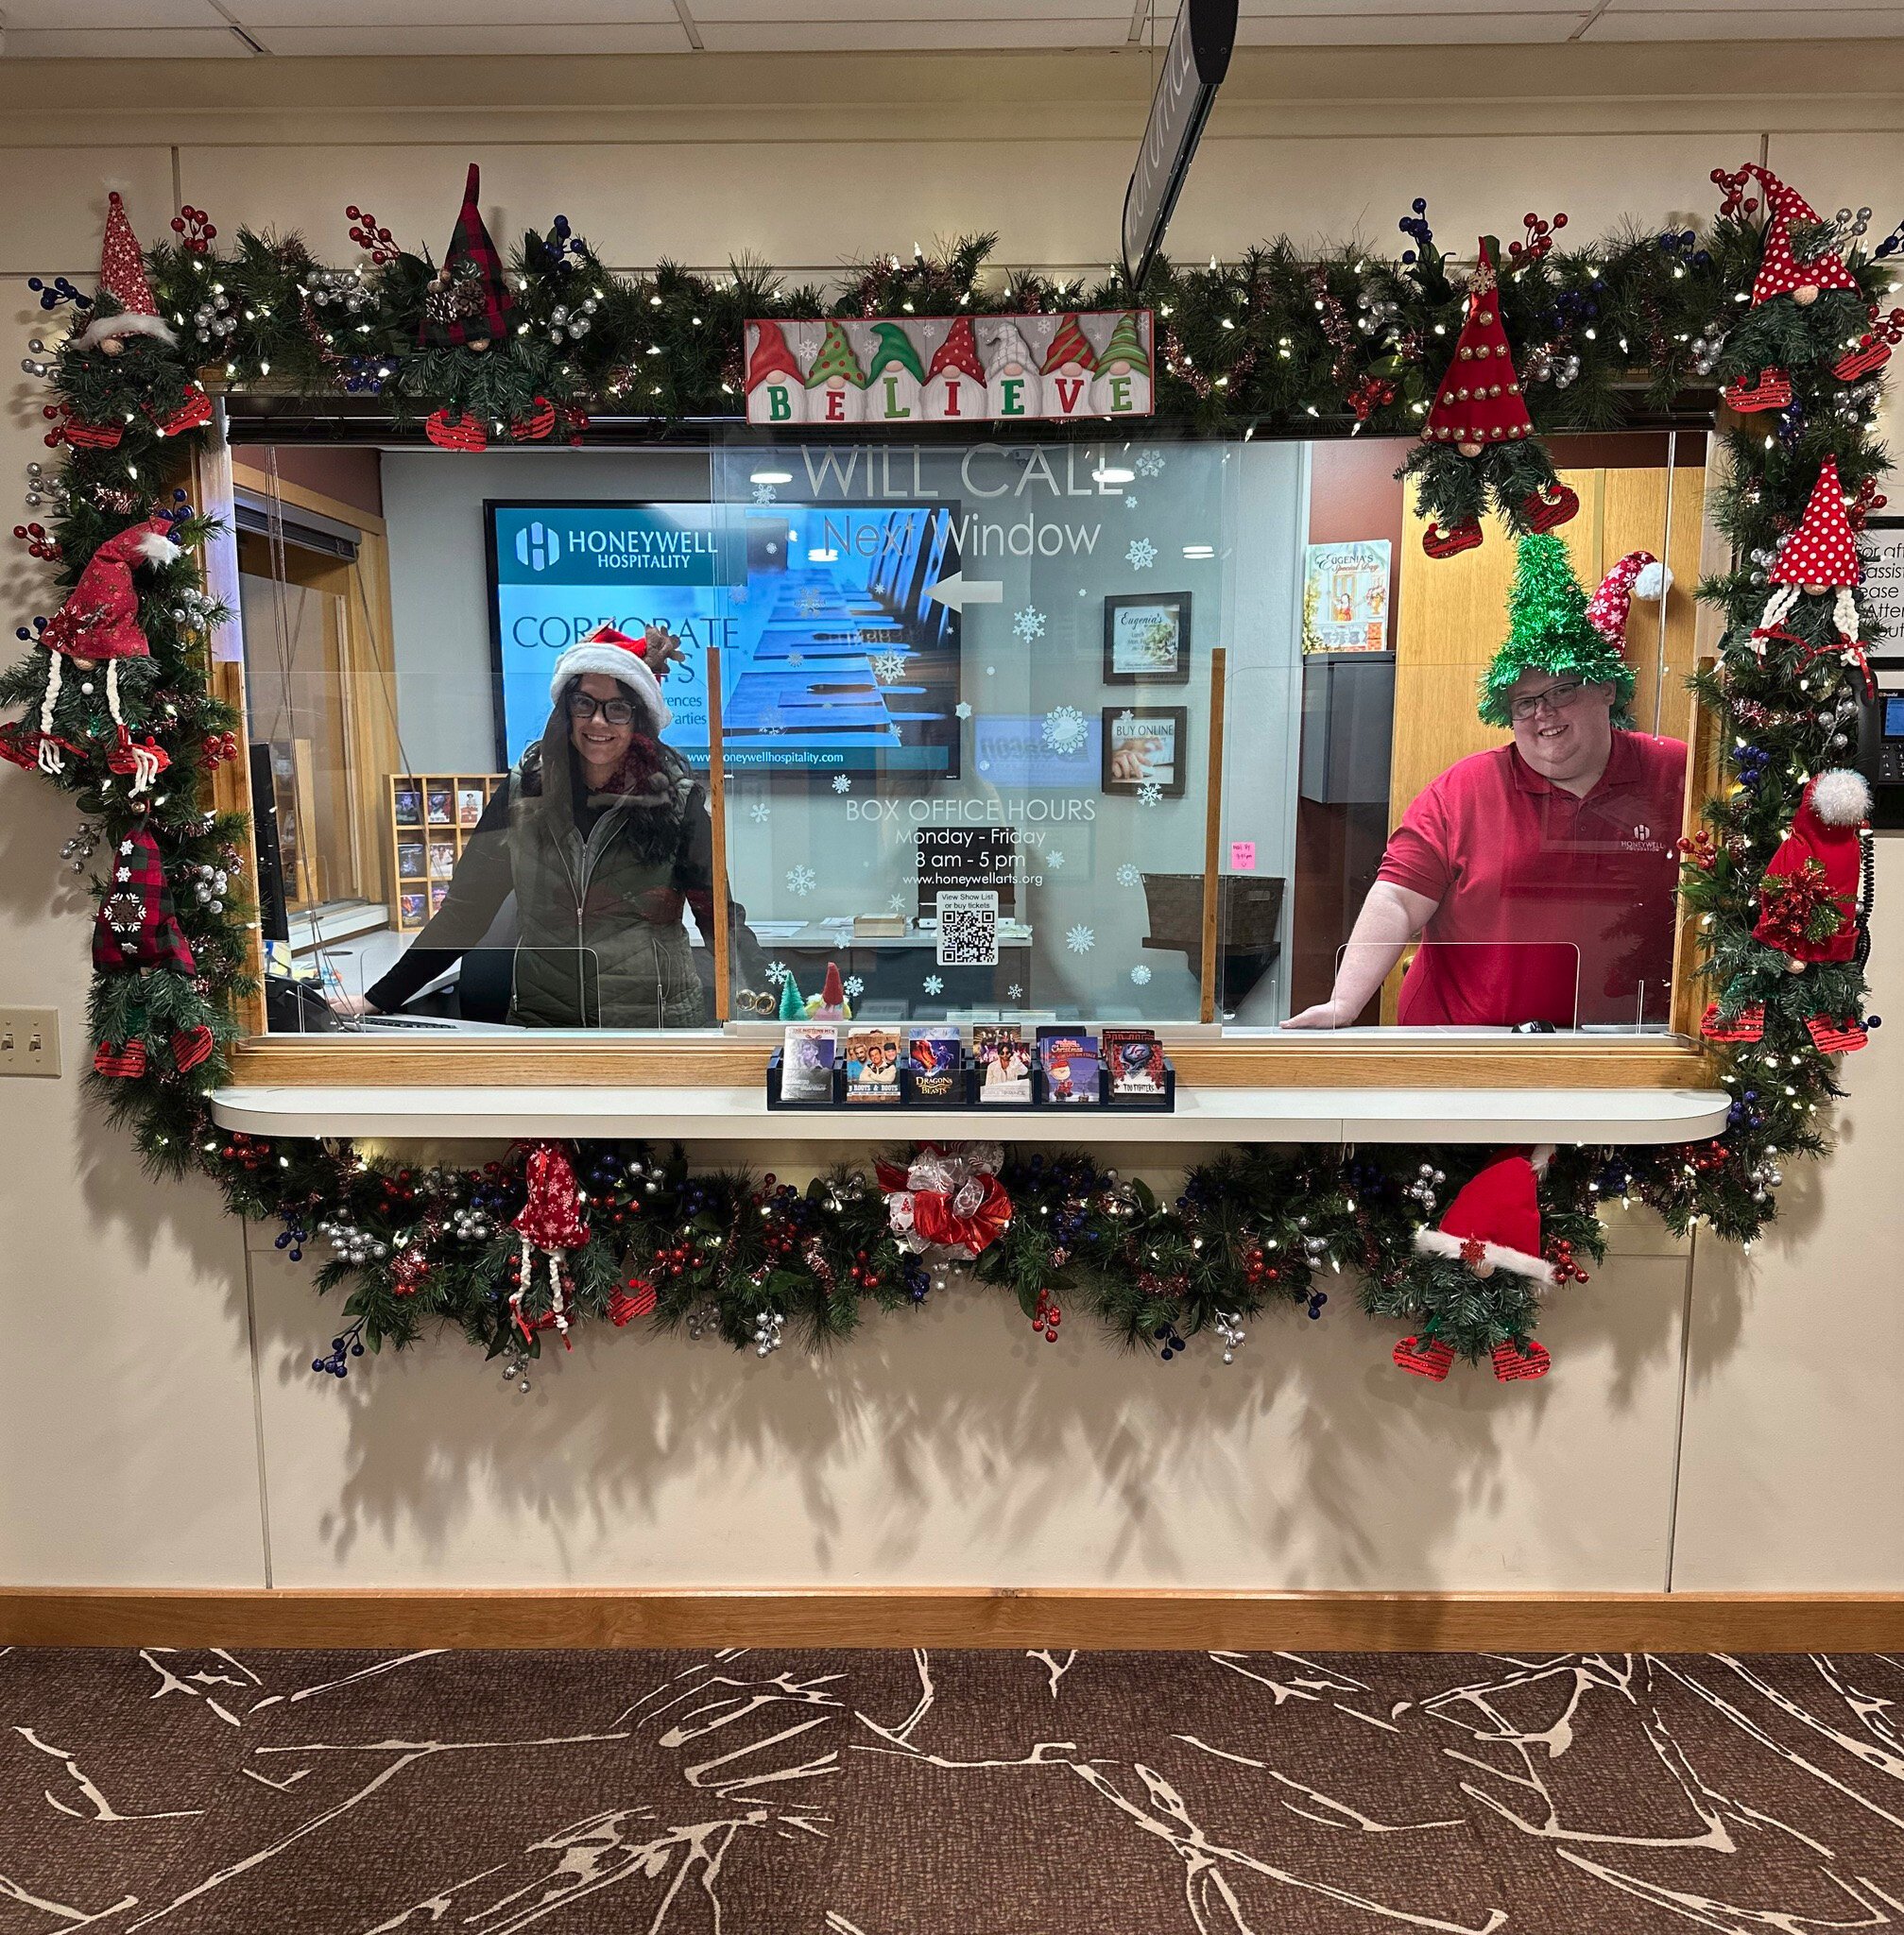 Shelby McLaughlin, Guest Relations Associate, and Cody Lee, Guest Relations Supervisor, celebrate the season with a decorated box office and festive hats.